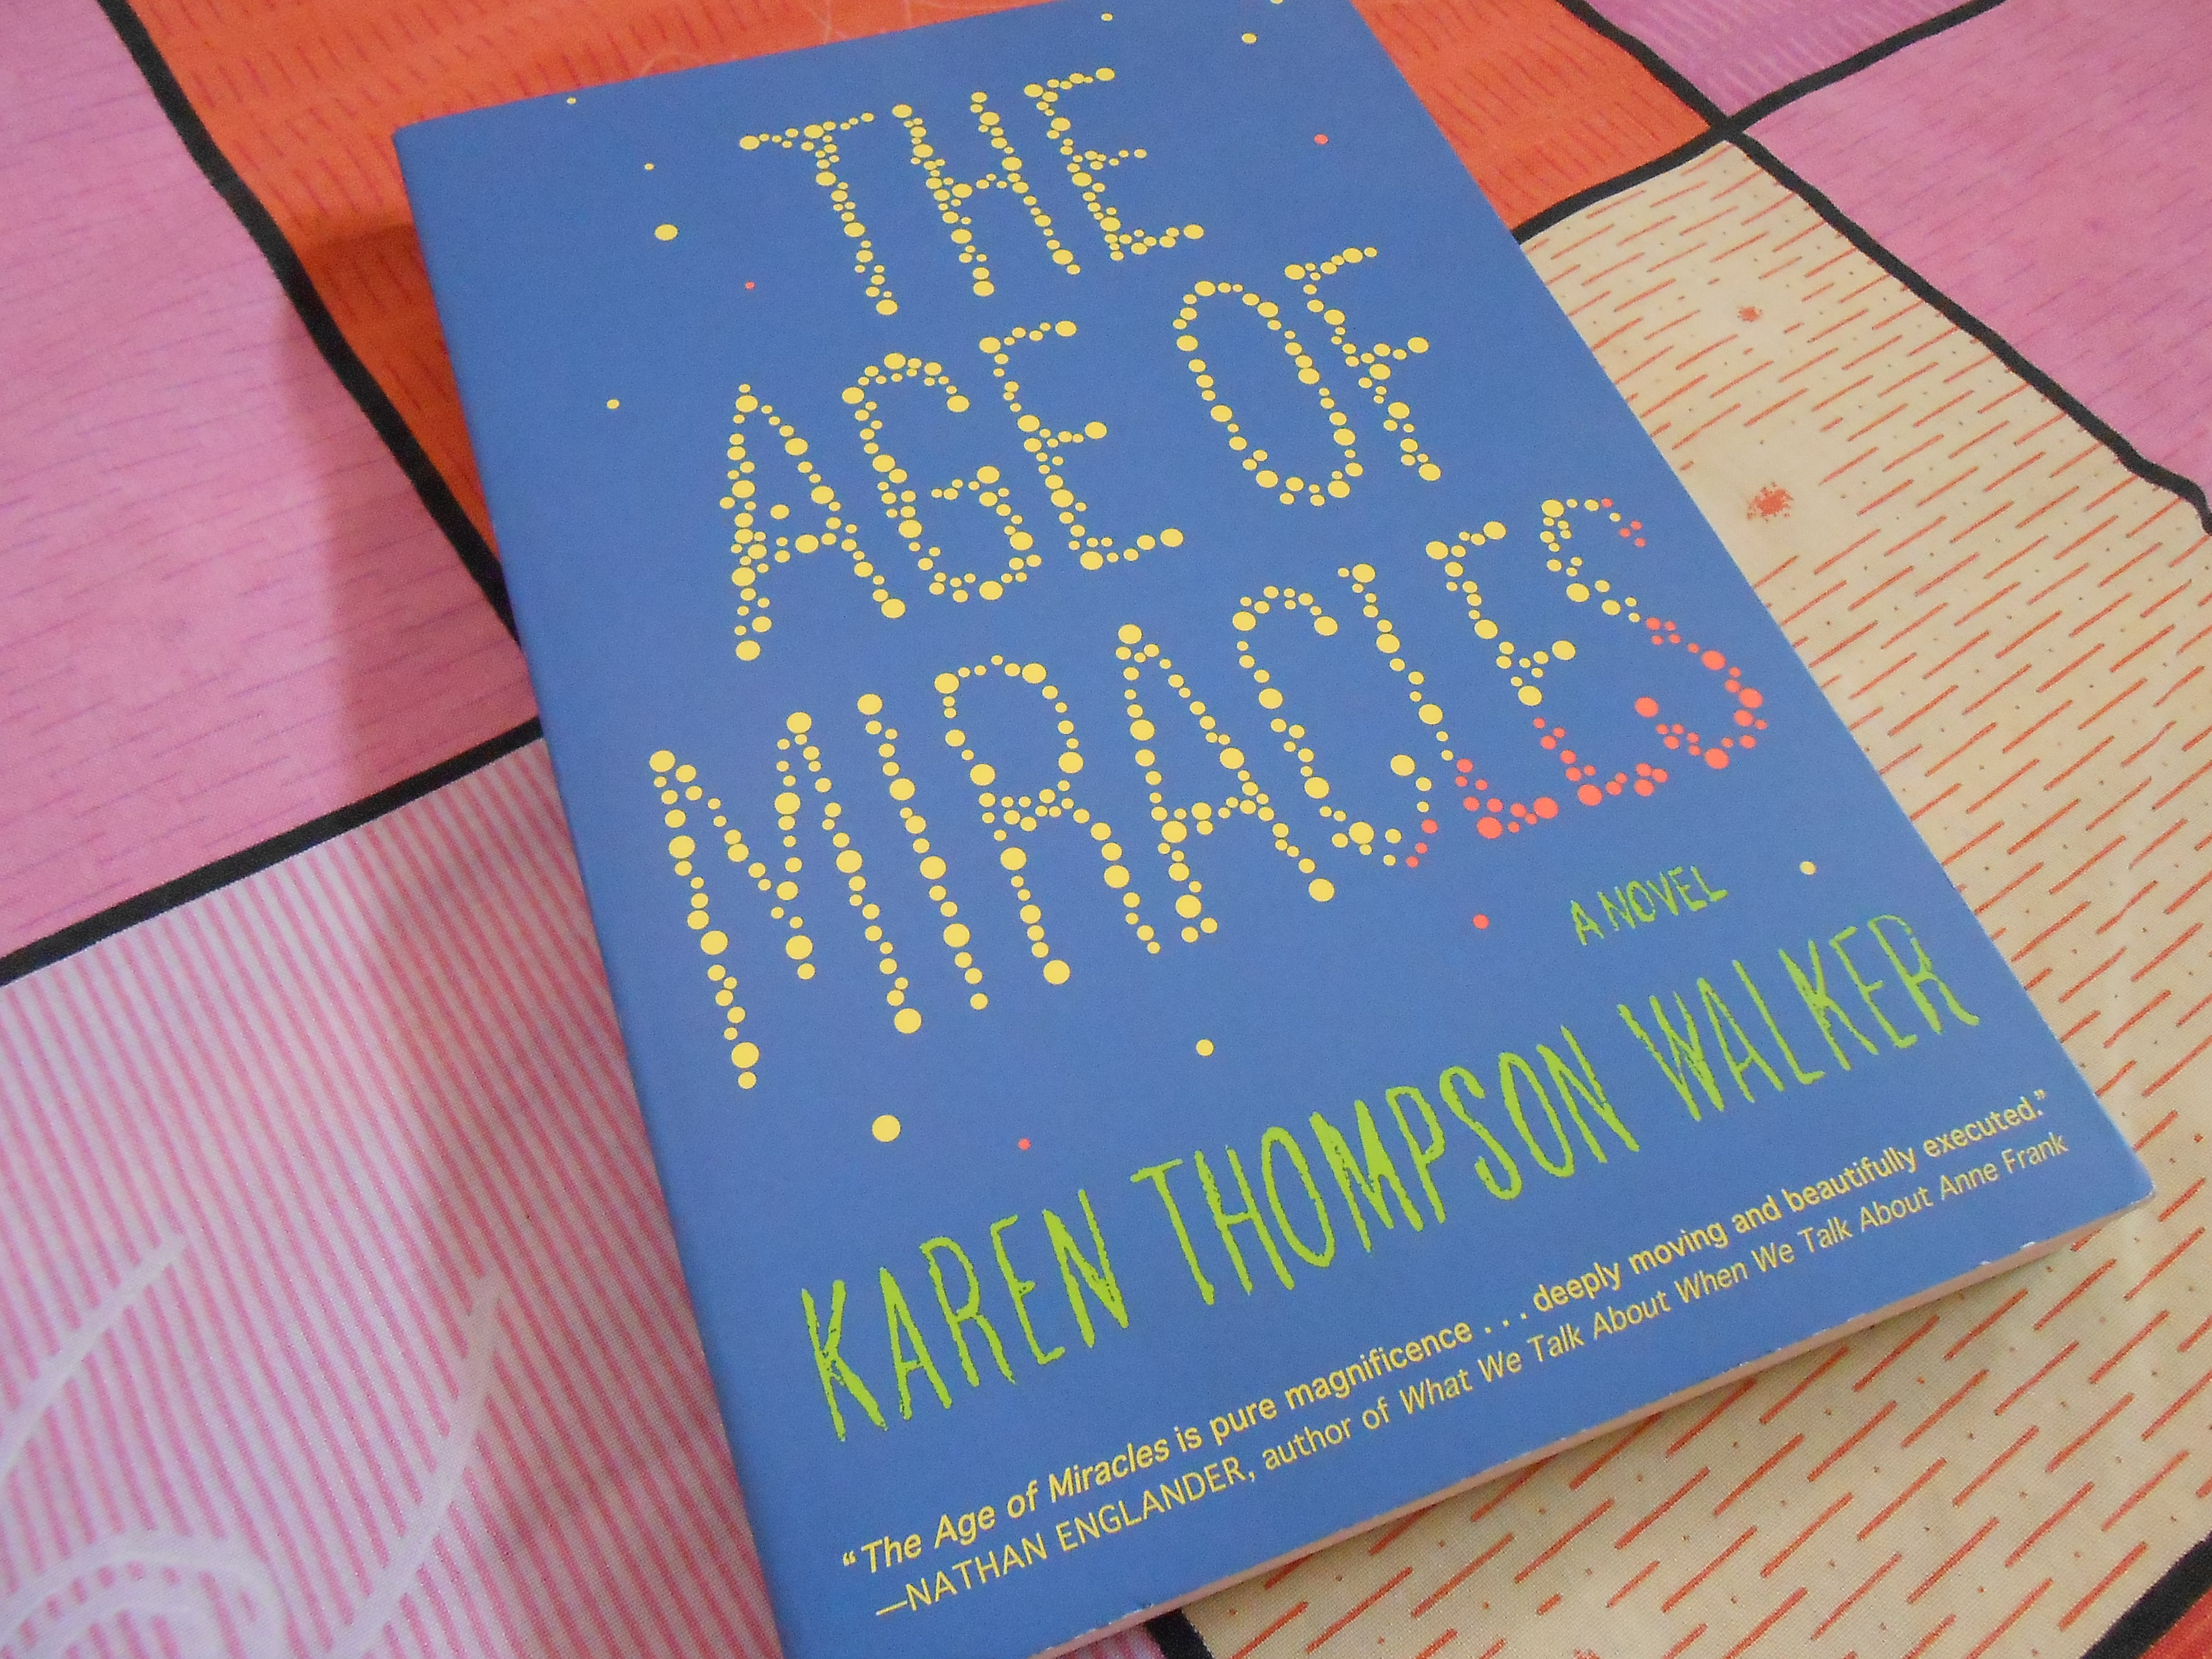 Age of Miracles